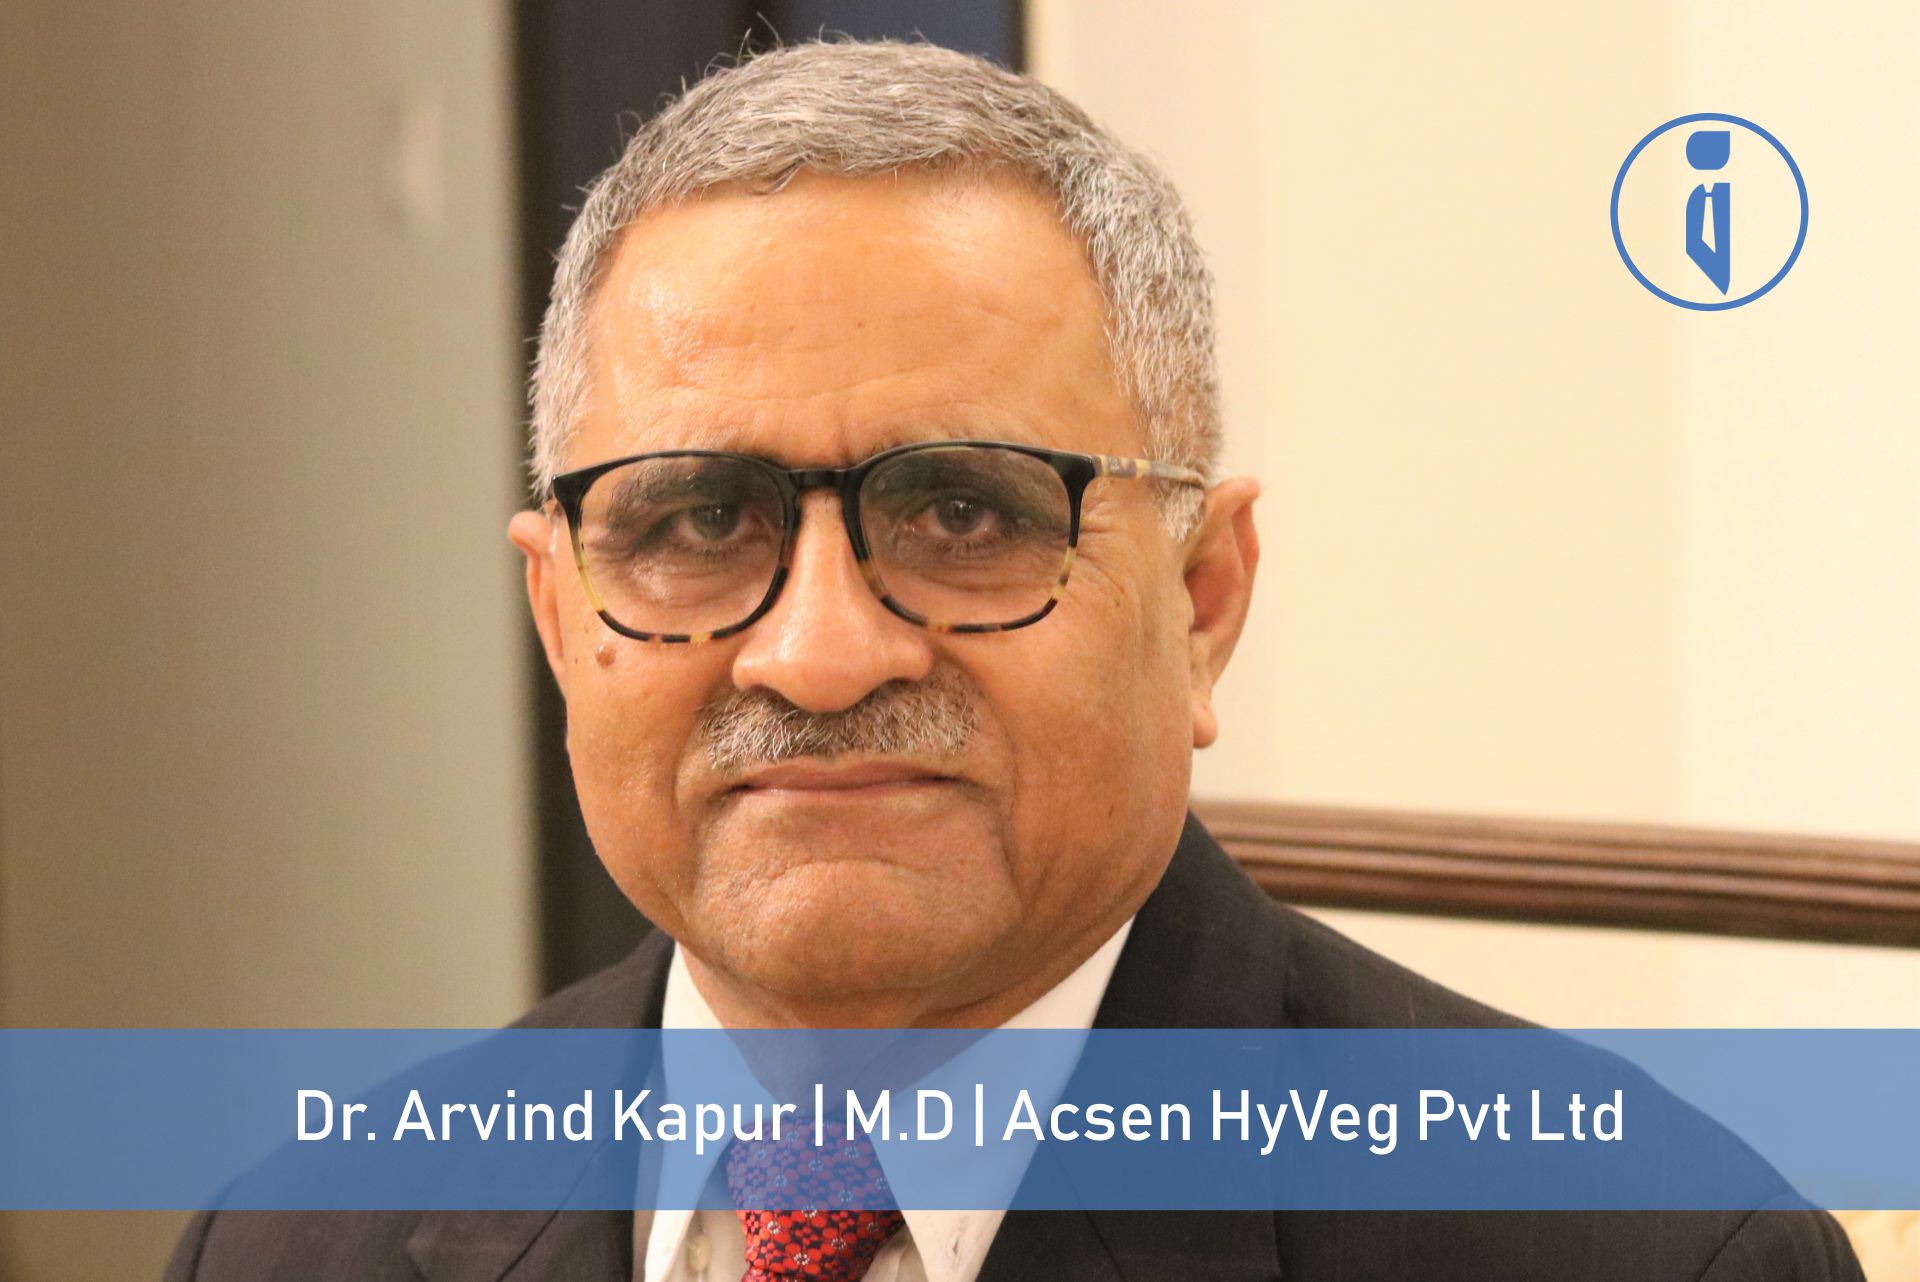 Dr. Arvind Kapur: Dedicated to Uplift the Indian Farmer’s Life